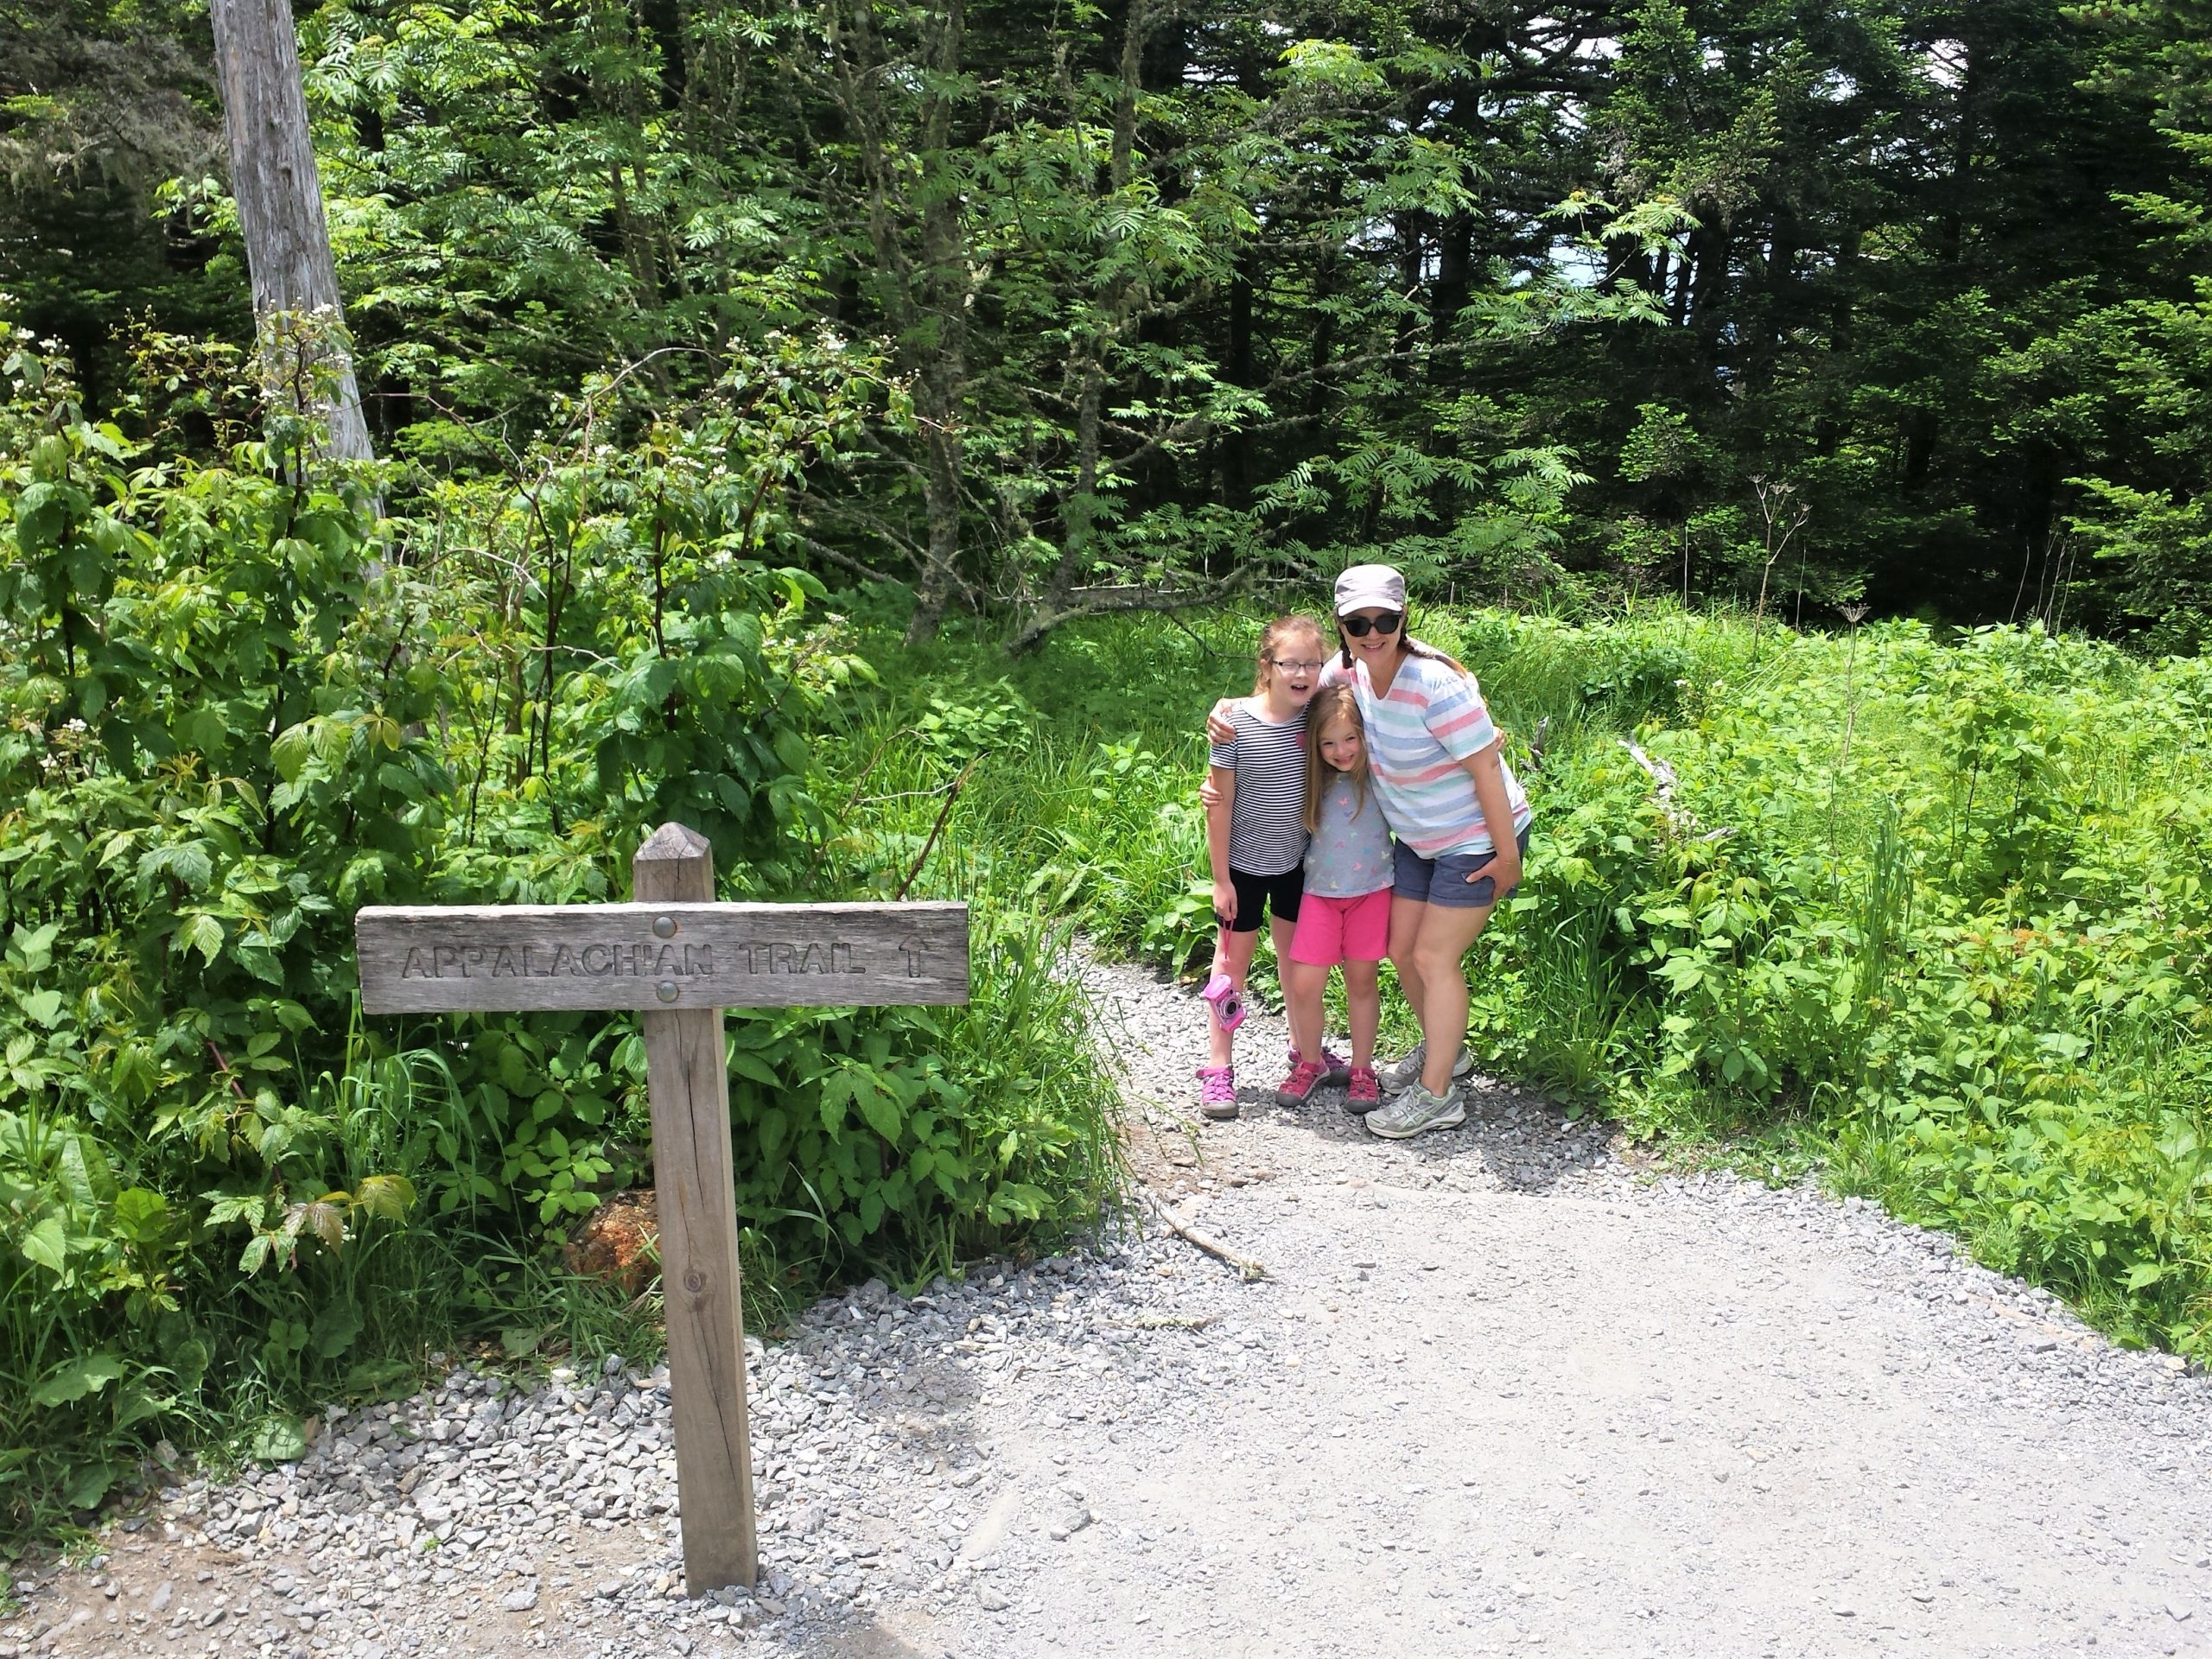 Kristi Valentini and her two kids set foot on the Appalachian Trail scaled 10 Things to Do With Kids in the Great Smoky Mountains